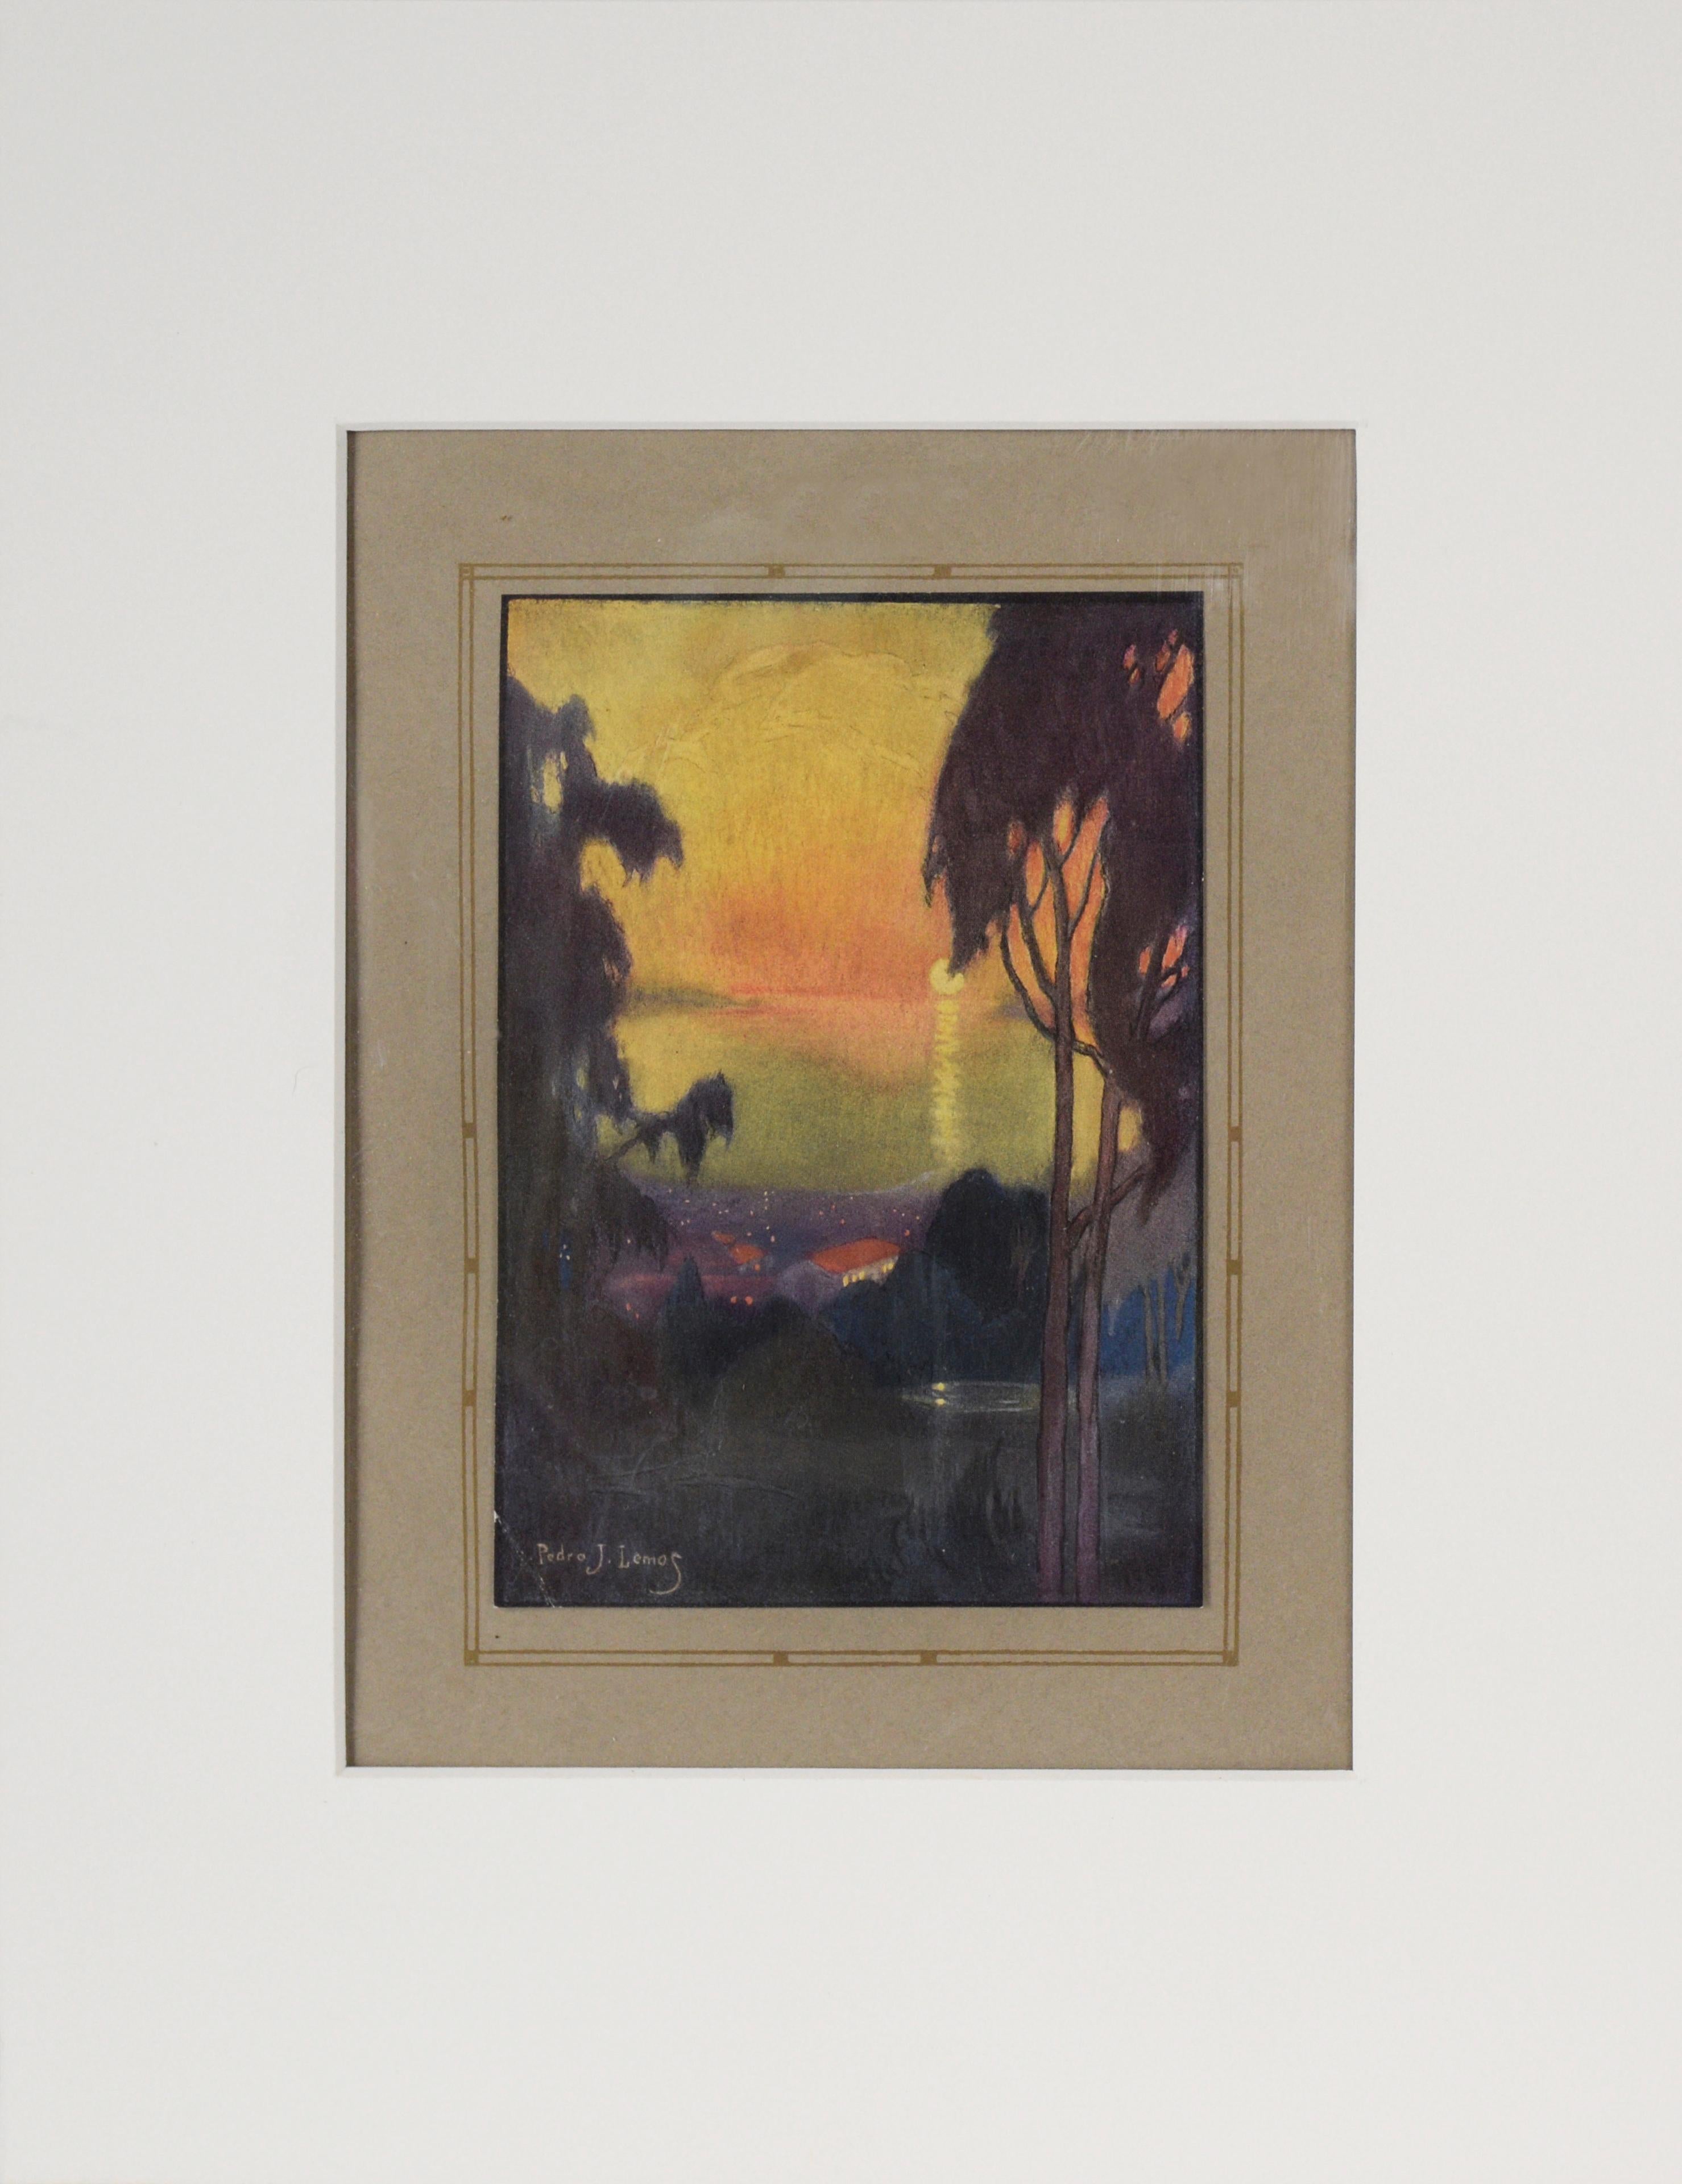 Pedro Lemos Landscape Print - "A Sunset From The Berkely Hills" - 1921 UC Berkeley Yearbook Color Lithograph